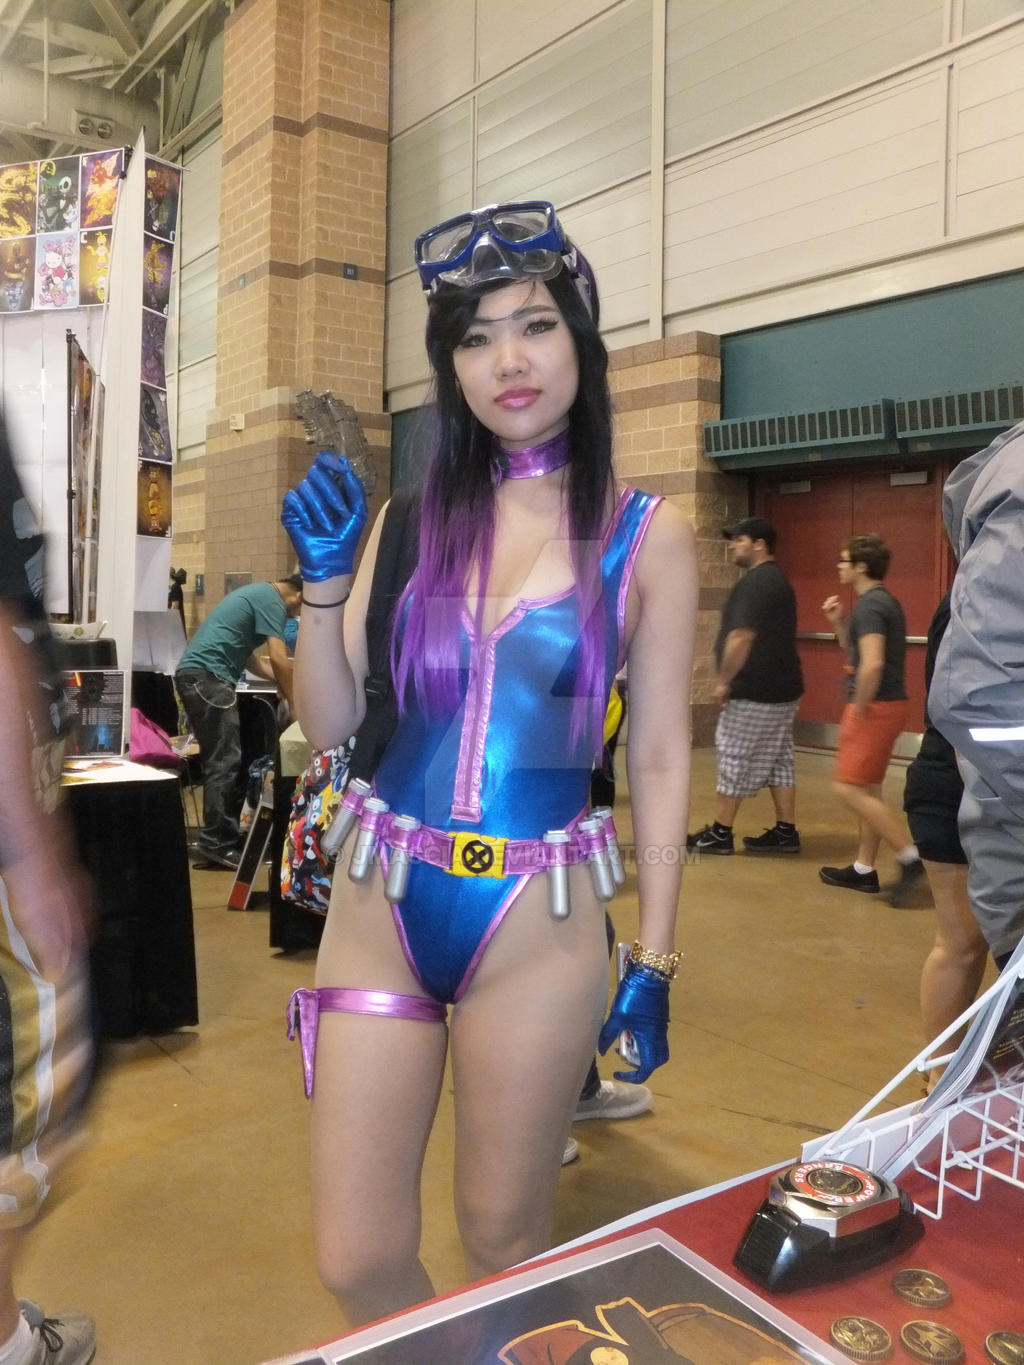 GUESS WHO'S BACK! Psylocke_cosplay_by_jmascia-d8tz6wy